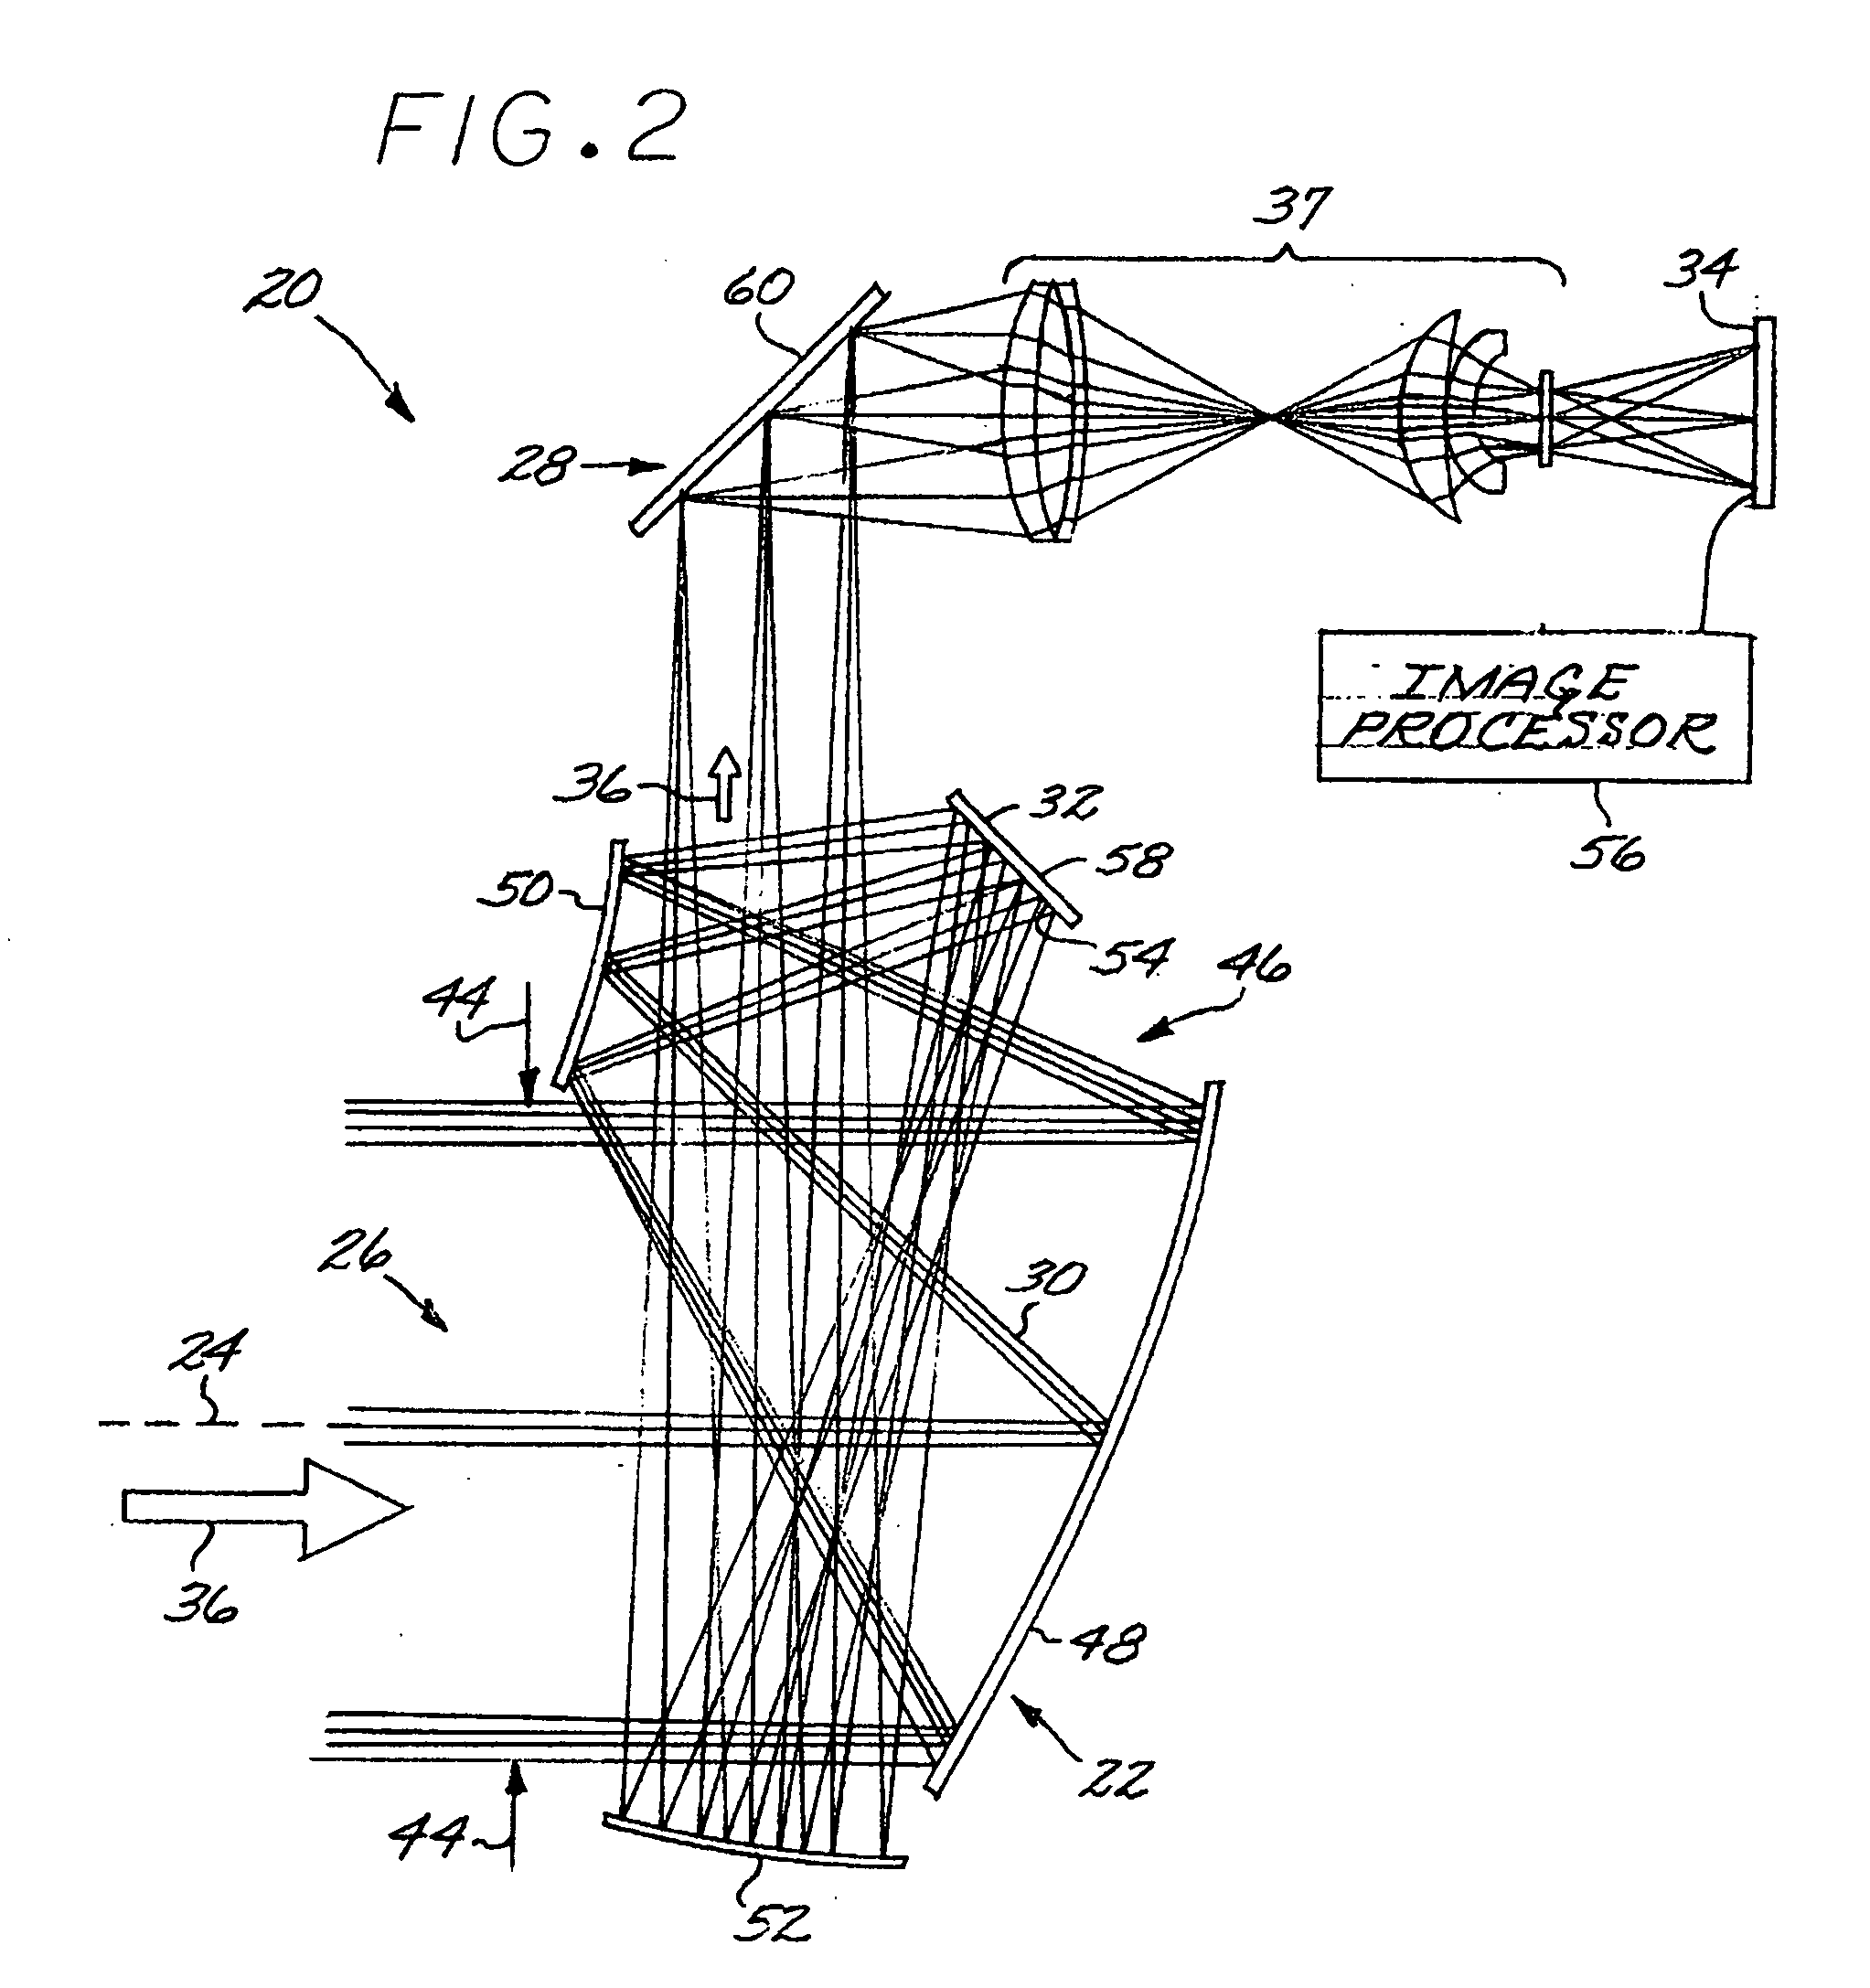 Common-aperture optical system incorporating a light sensor and a light source